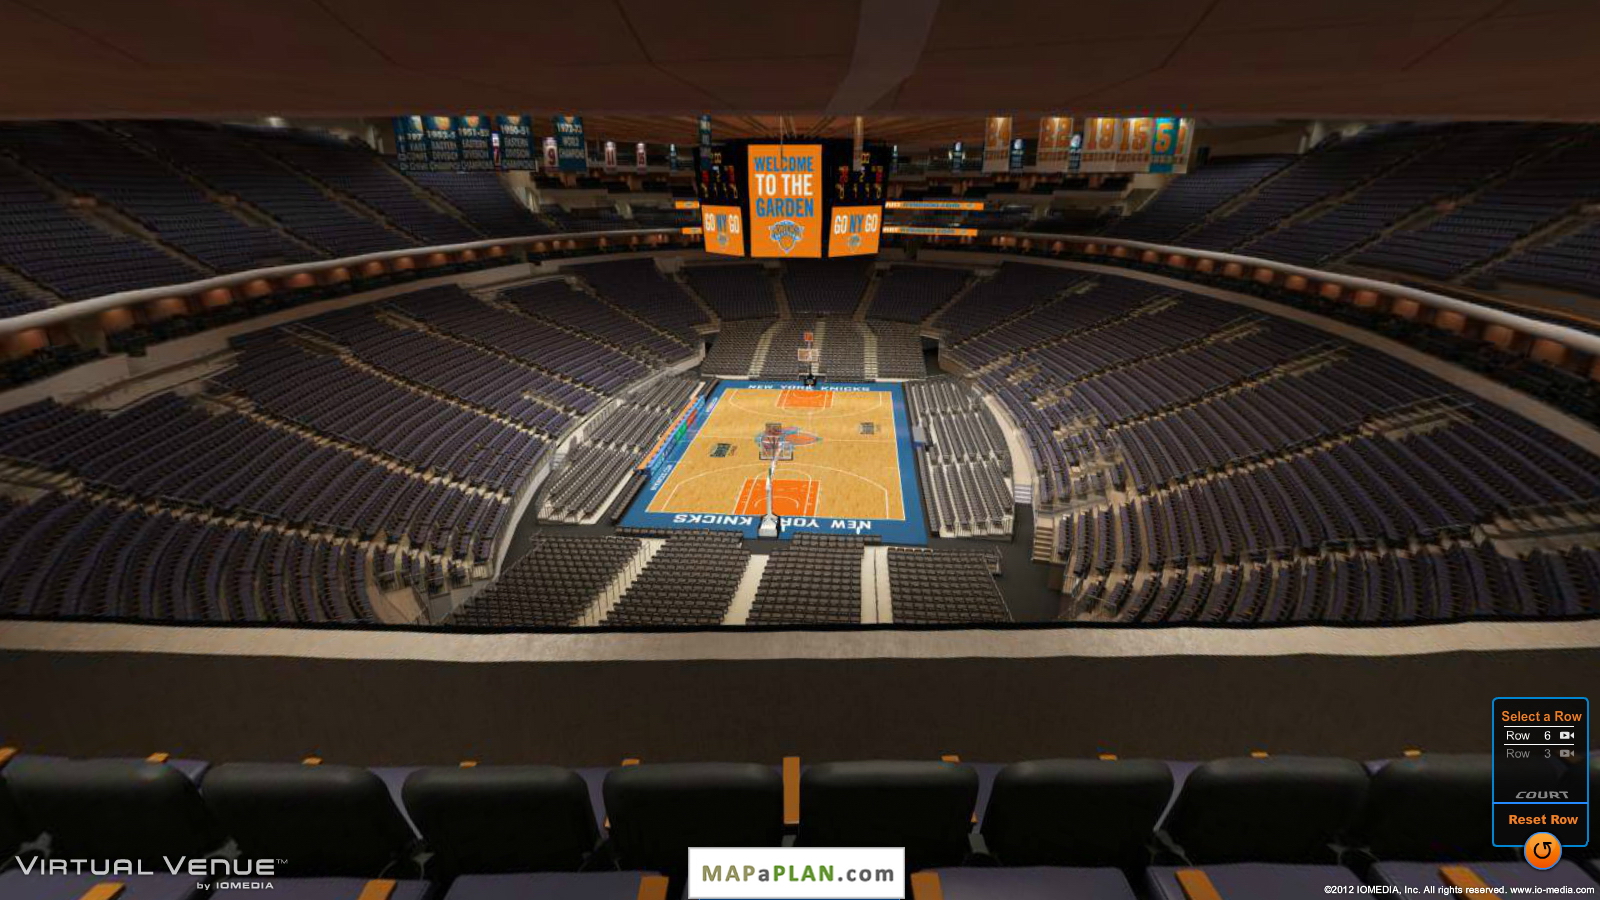 Msg Theater Seating Chart View